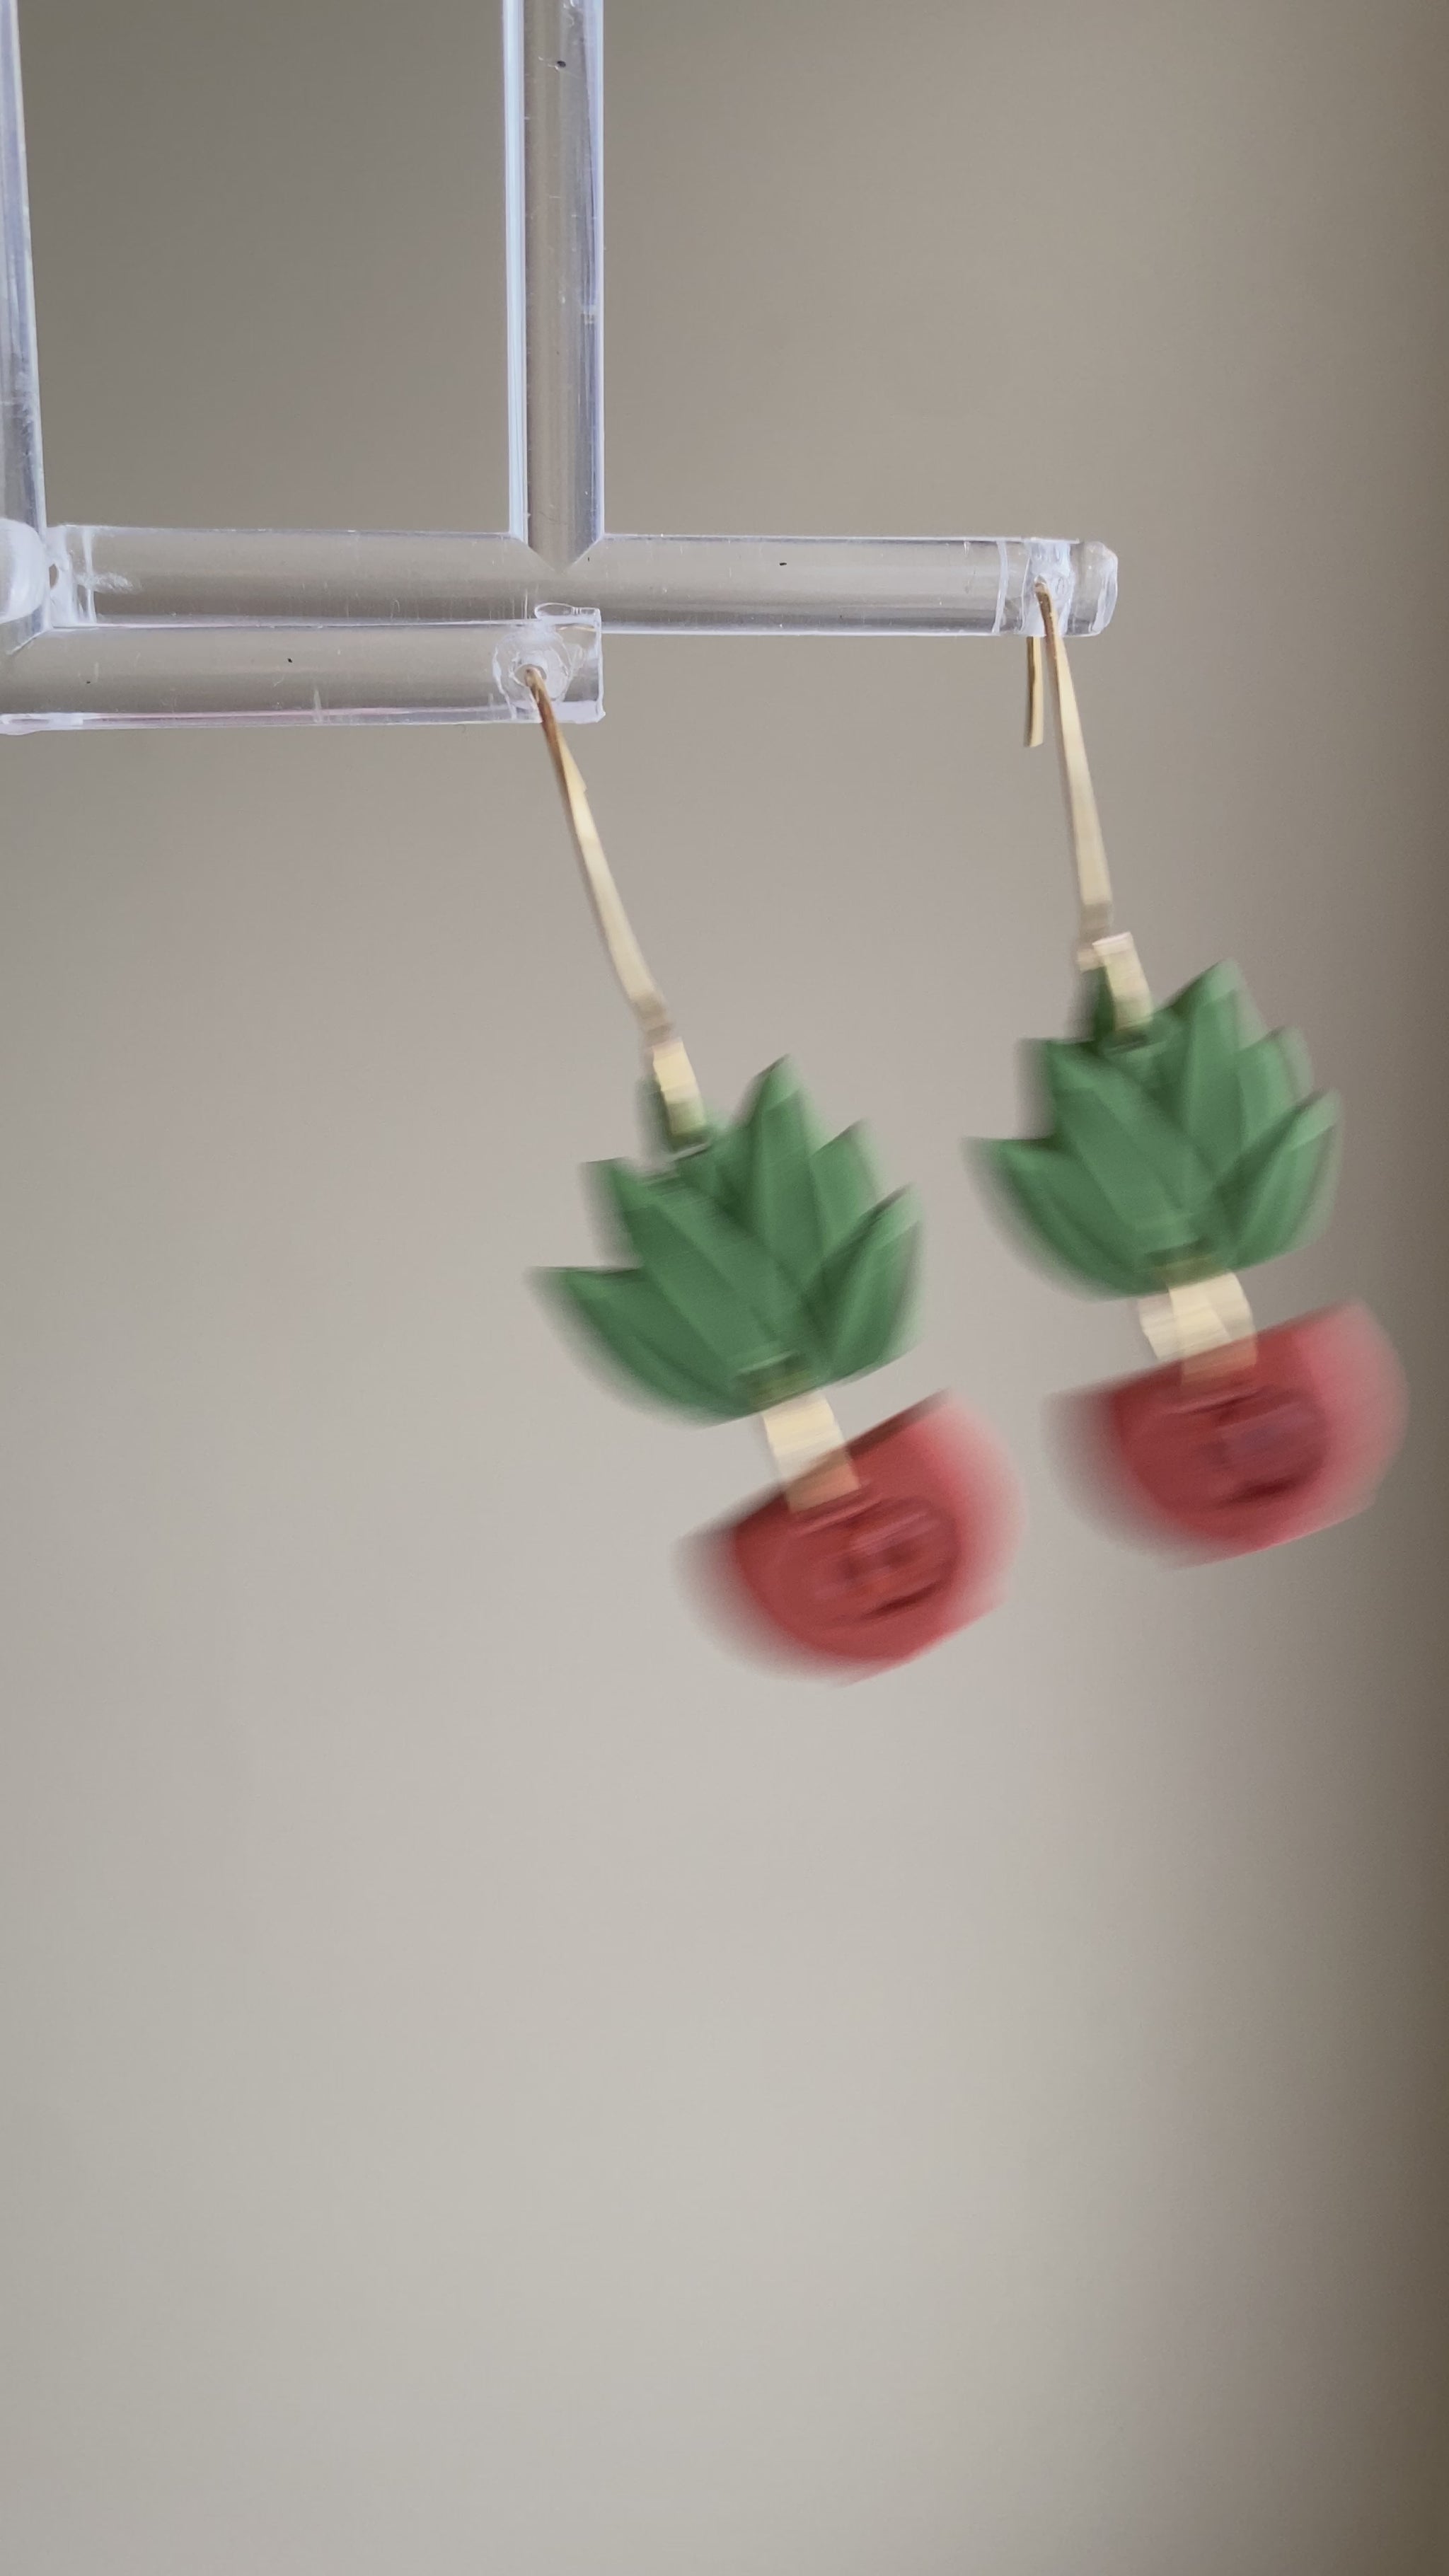   Pot and plant textured polymer clay dangle earrings 0125 by Wendy Varner Designs